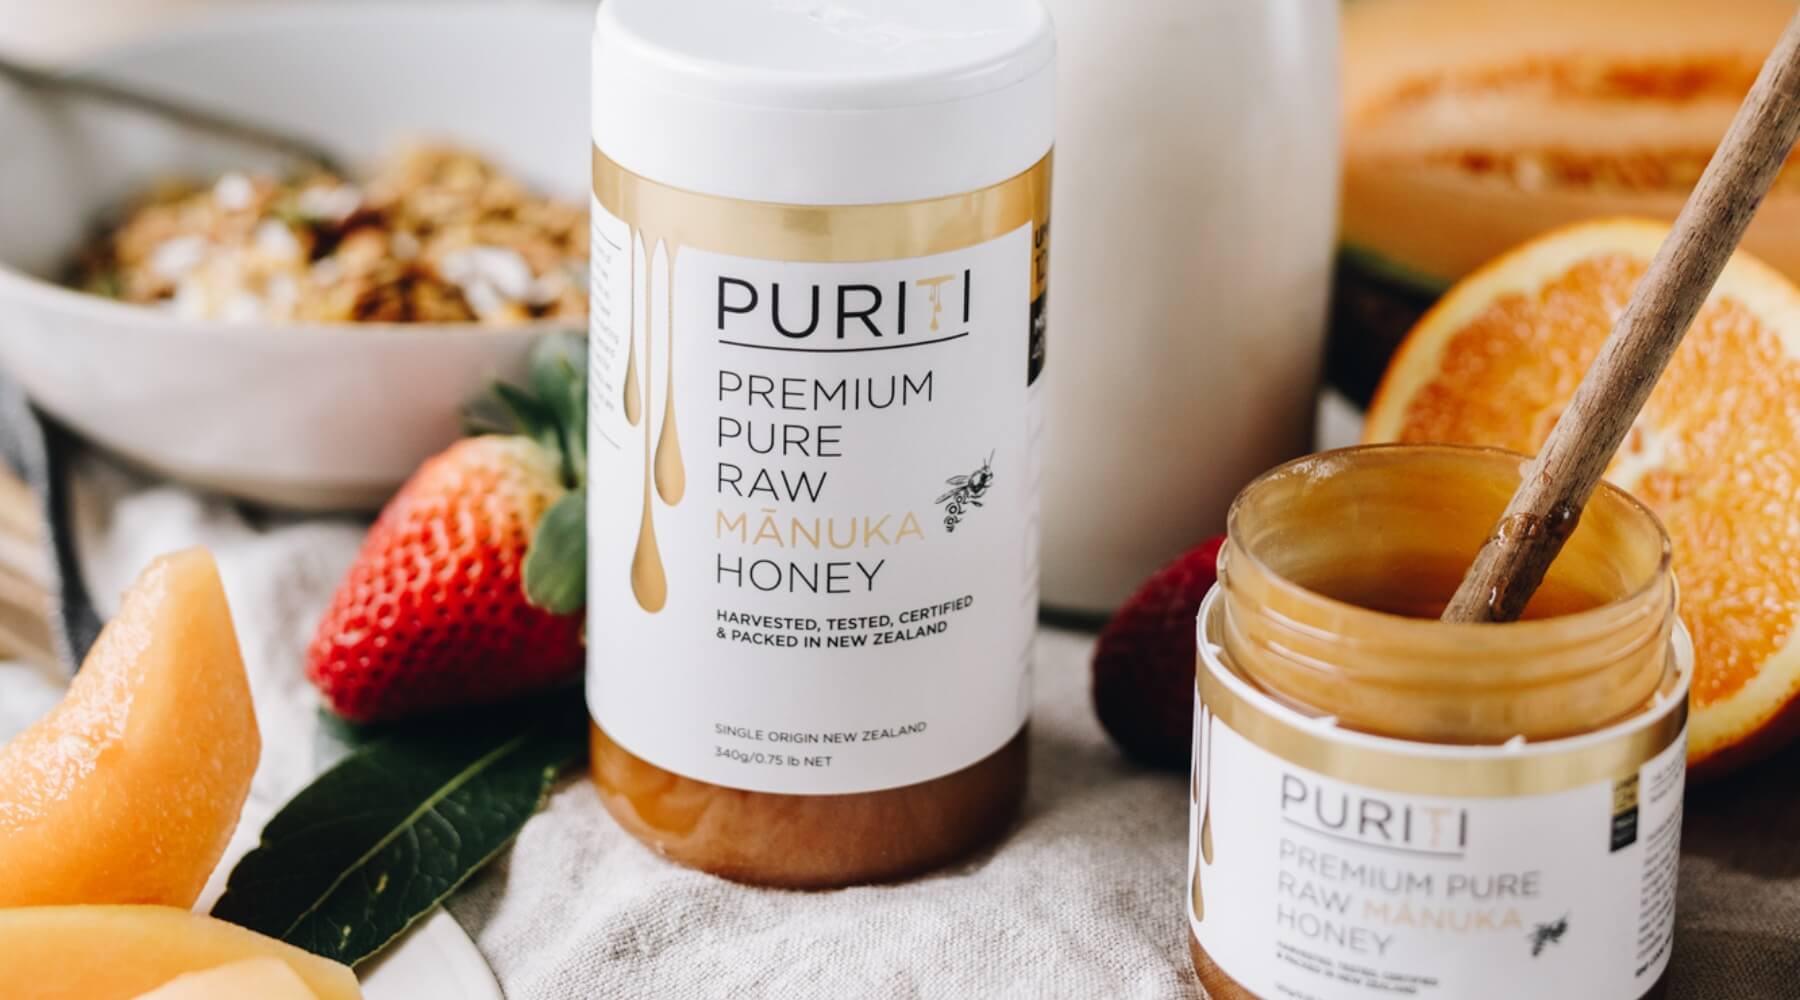 What To Look For When Buying Pure Manuka Honey - PURITI